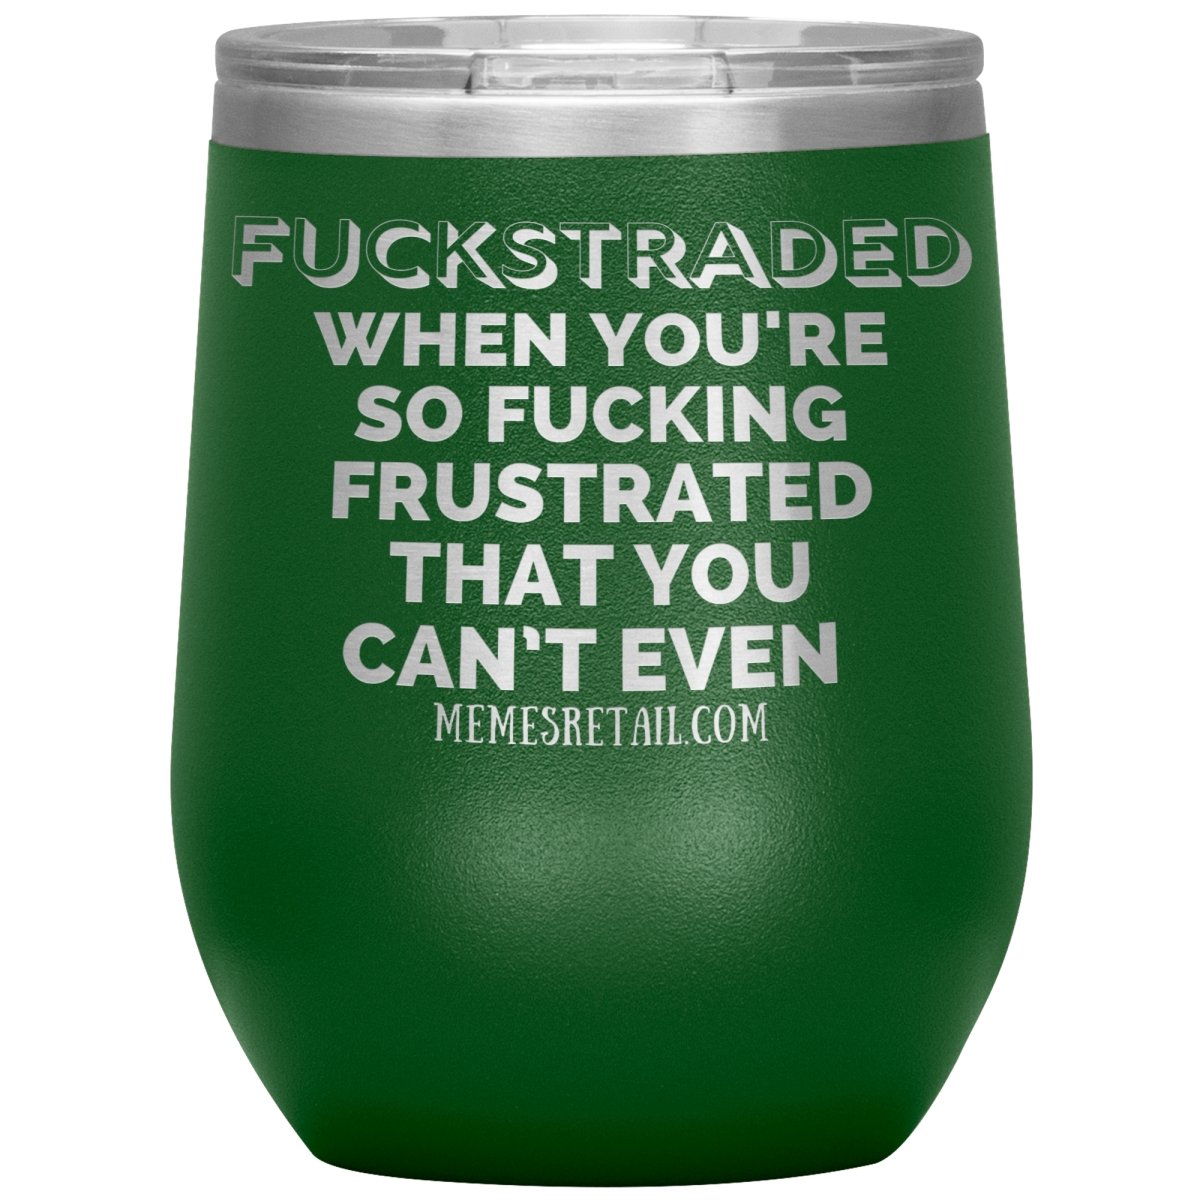 Fuckstraded, When You're So Fucking Frustrated That You Can’t Even Tumblers, 12oz Wine Insulated Tumbler / Green - MemesRetail.com